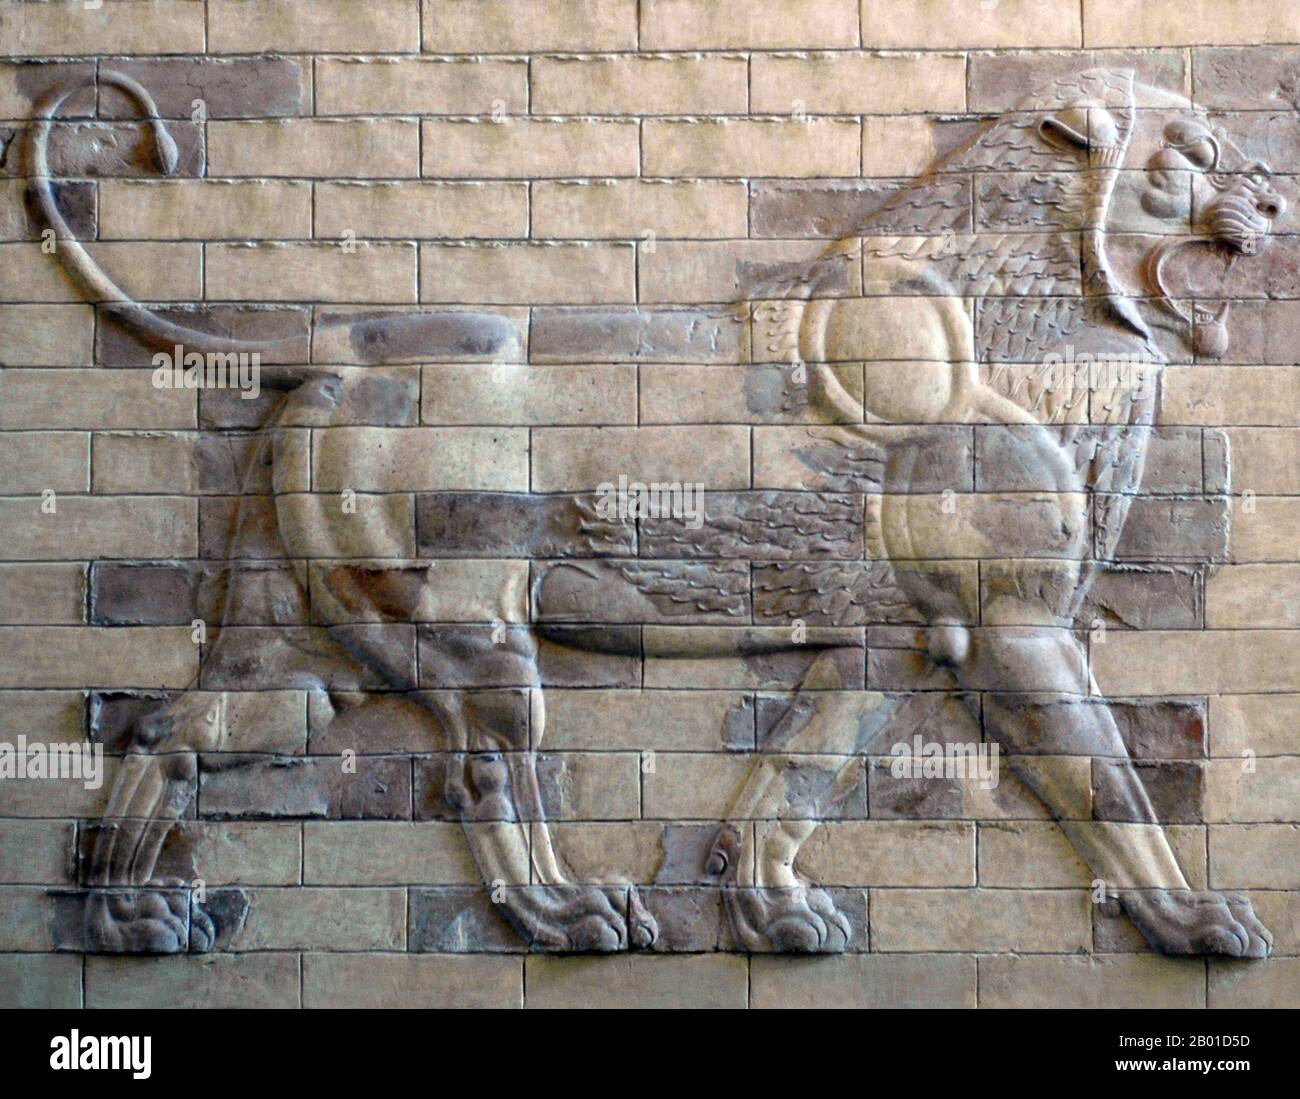 Iran/Persia: Terracotta relief of a lion from a wall in the palace of Darius I (550-486 BCE), Susa, c. 510 BCE.  Darius I (r. 522-486 BCE), also known as Darius the Great, was the third King of Kings of the Achaemenid Empire. Darius held the empire at its peak, then including Egypt, Balochistan, Kurdistan and parts of Greece. The decay and eventual downfall of the empire commenced with his death and the ascension of his son, Xerxes I. Stock Photo